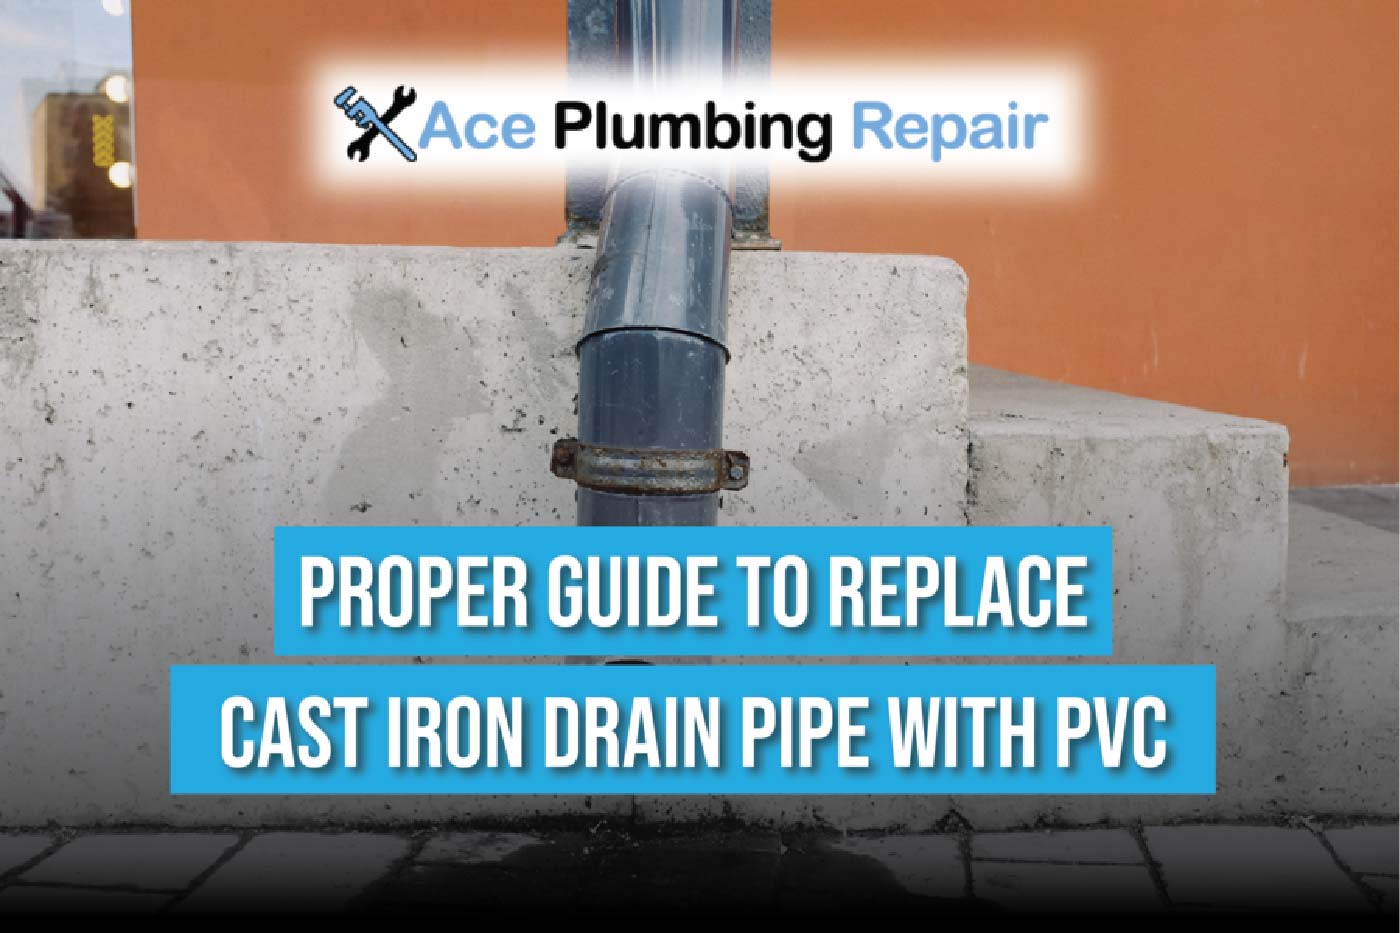 How to Replace Cast Iron Drain Pipe with PVC